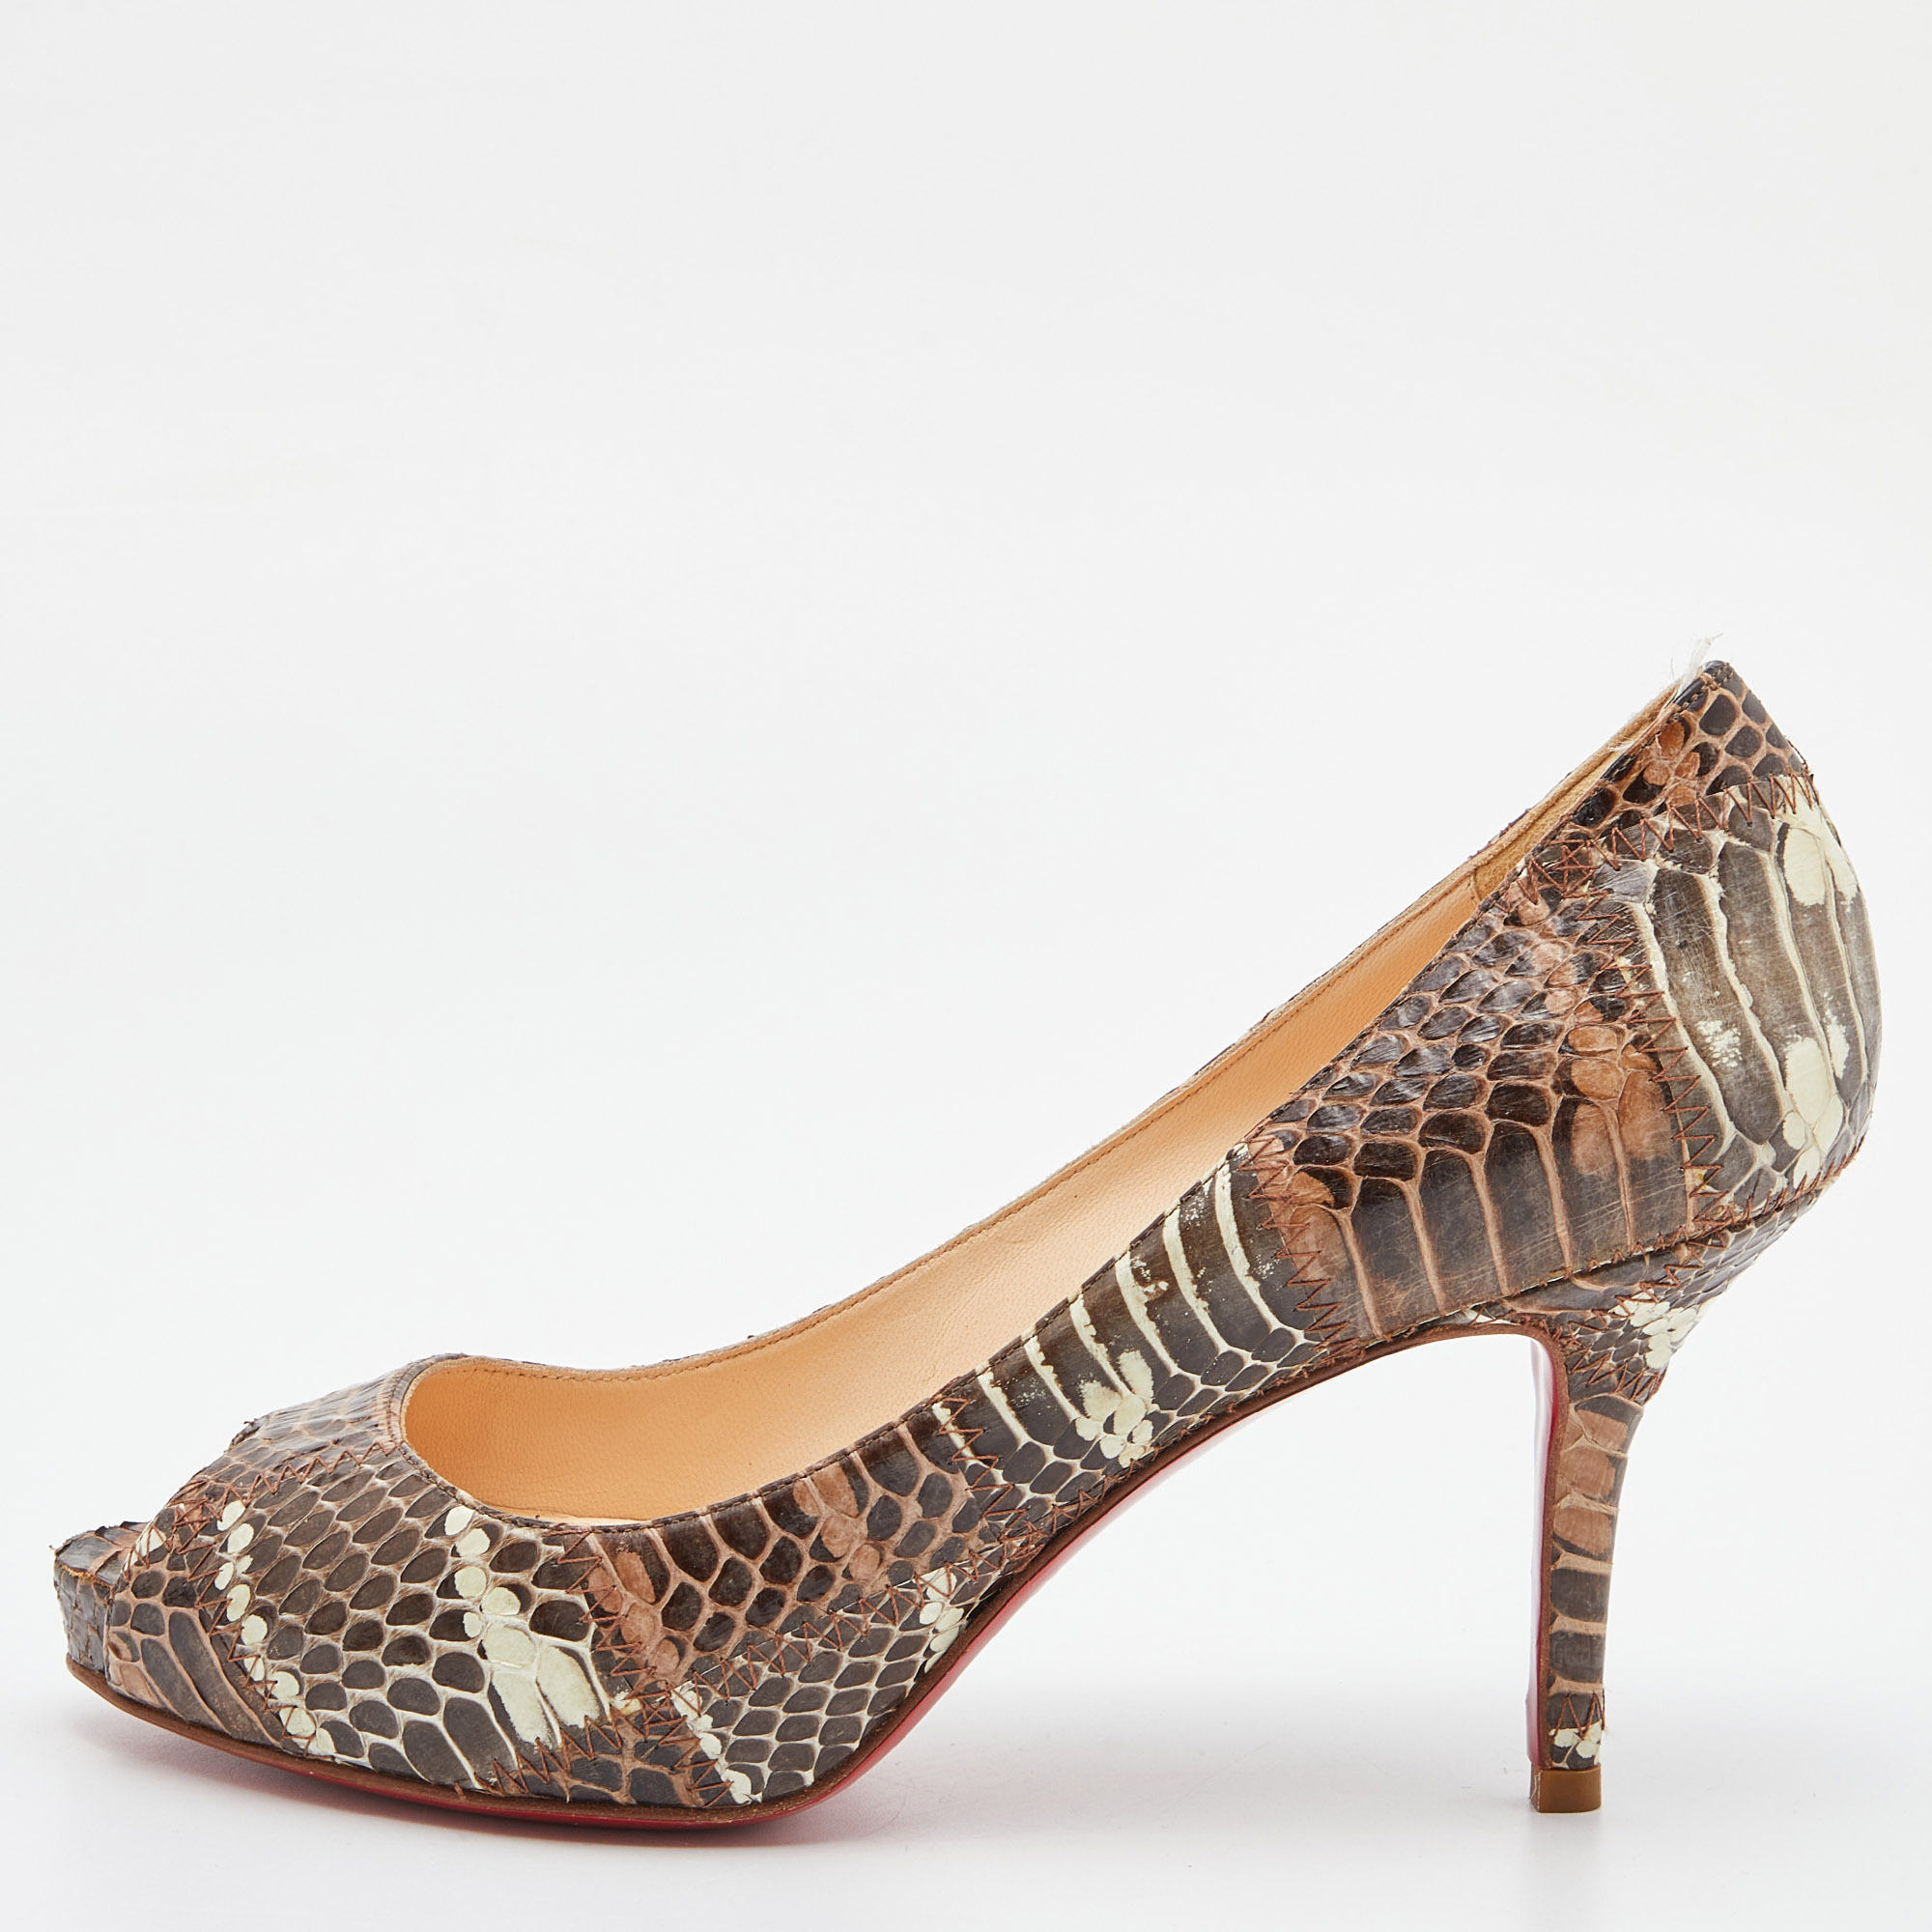 Christian louboutin brown watersnake leather very prive peep toe pumps size 37